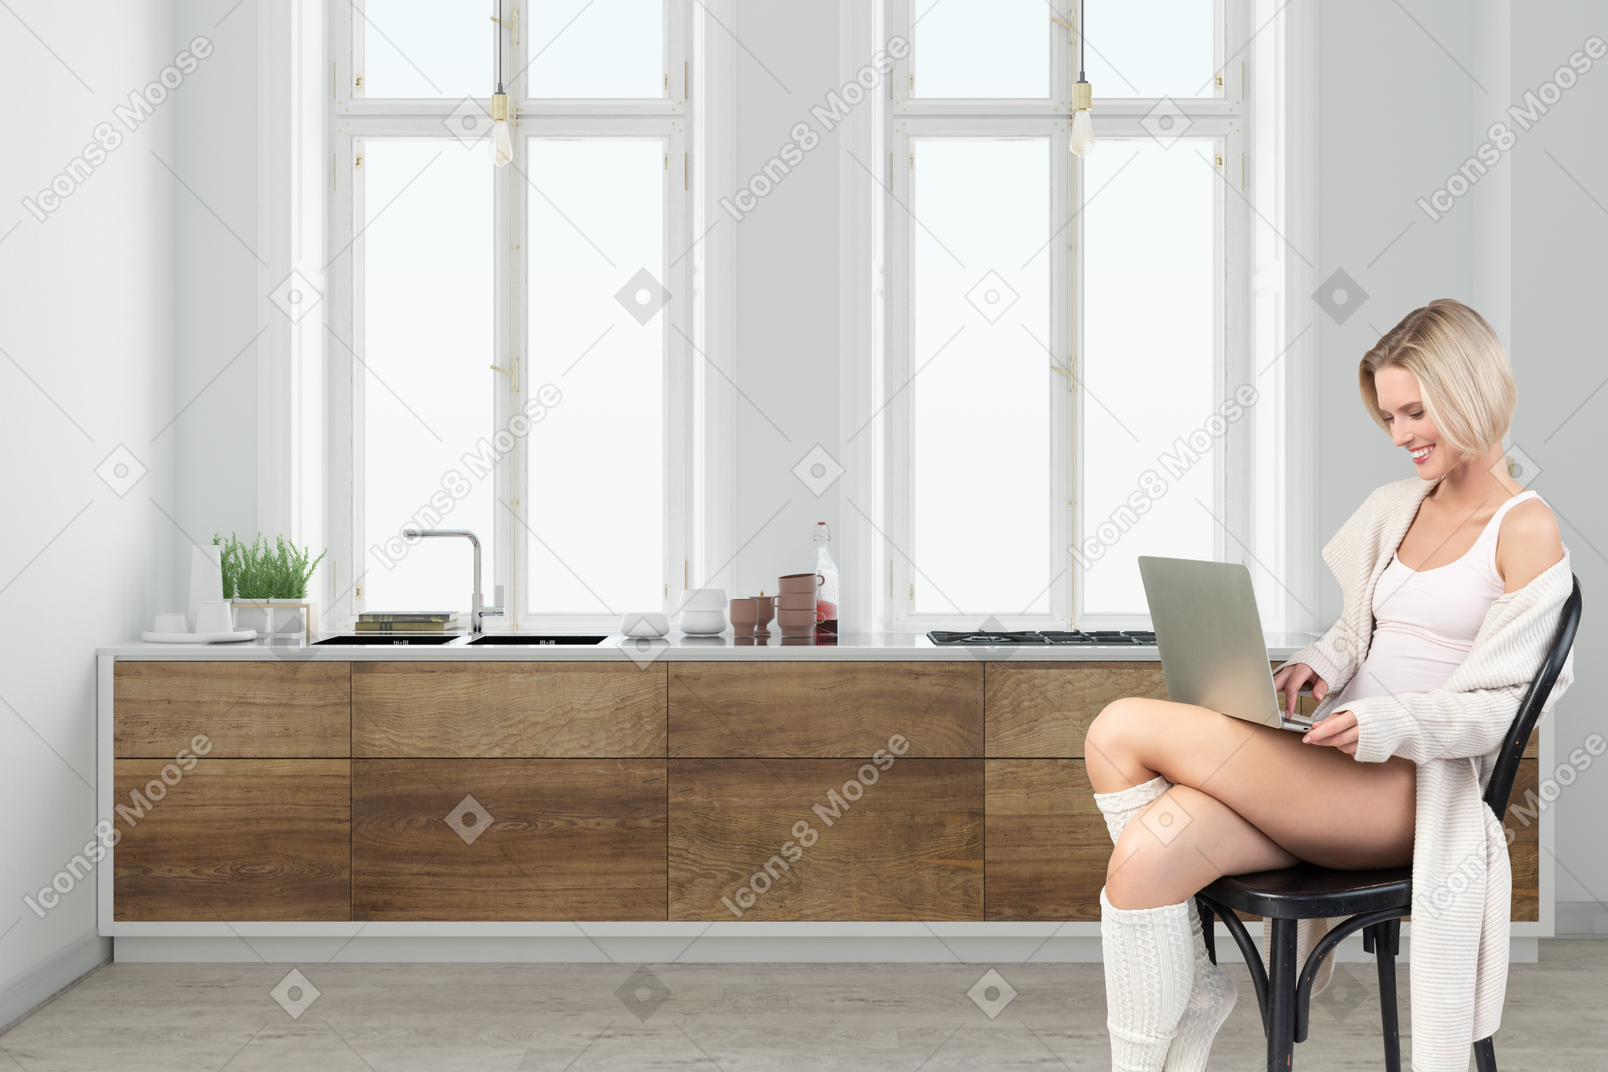 Woman sitting on a chair using a laptop